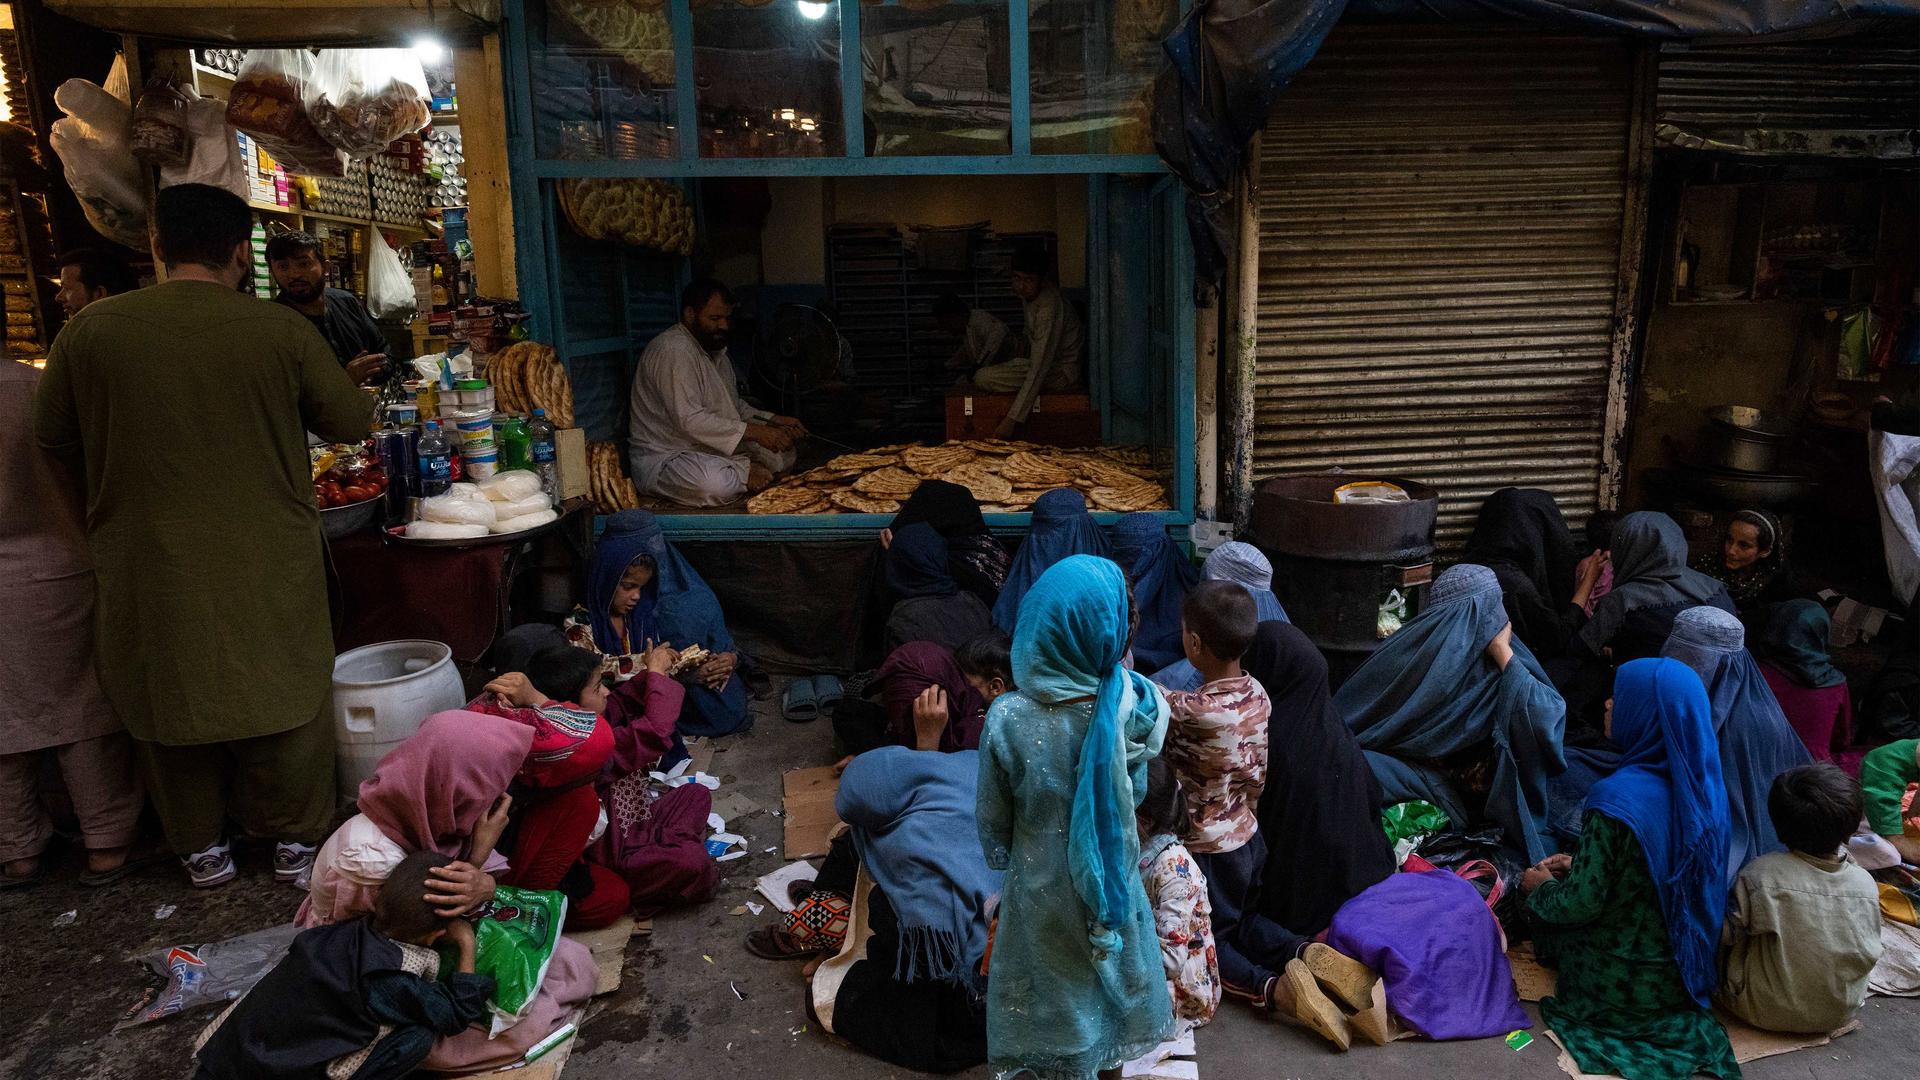 Afghan women and children sit in front of a bakery waiting for bread donations in Kabul's Old City, Afghanistan, on Sept. 16, 2021.